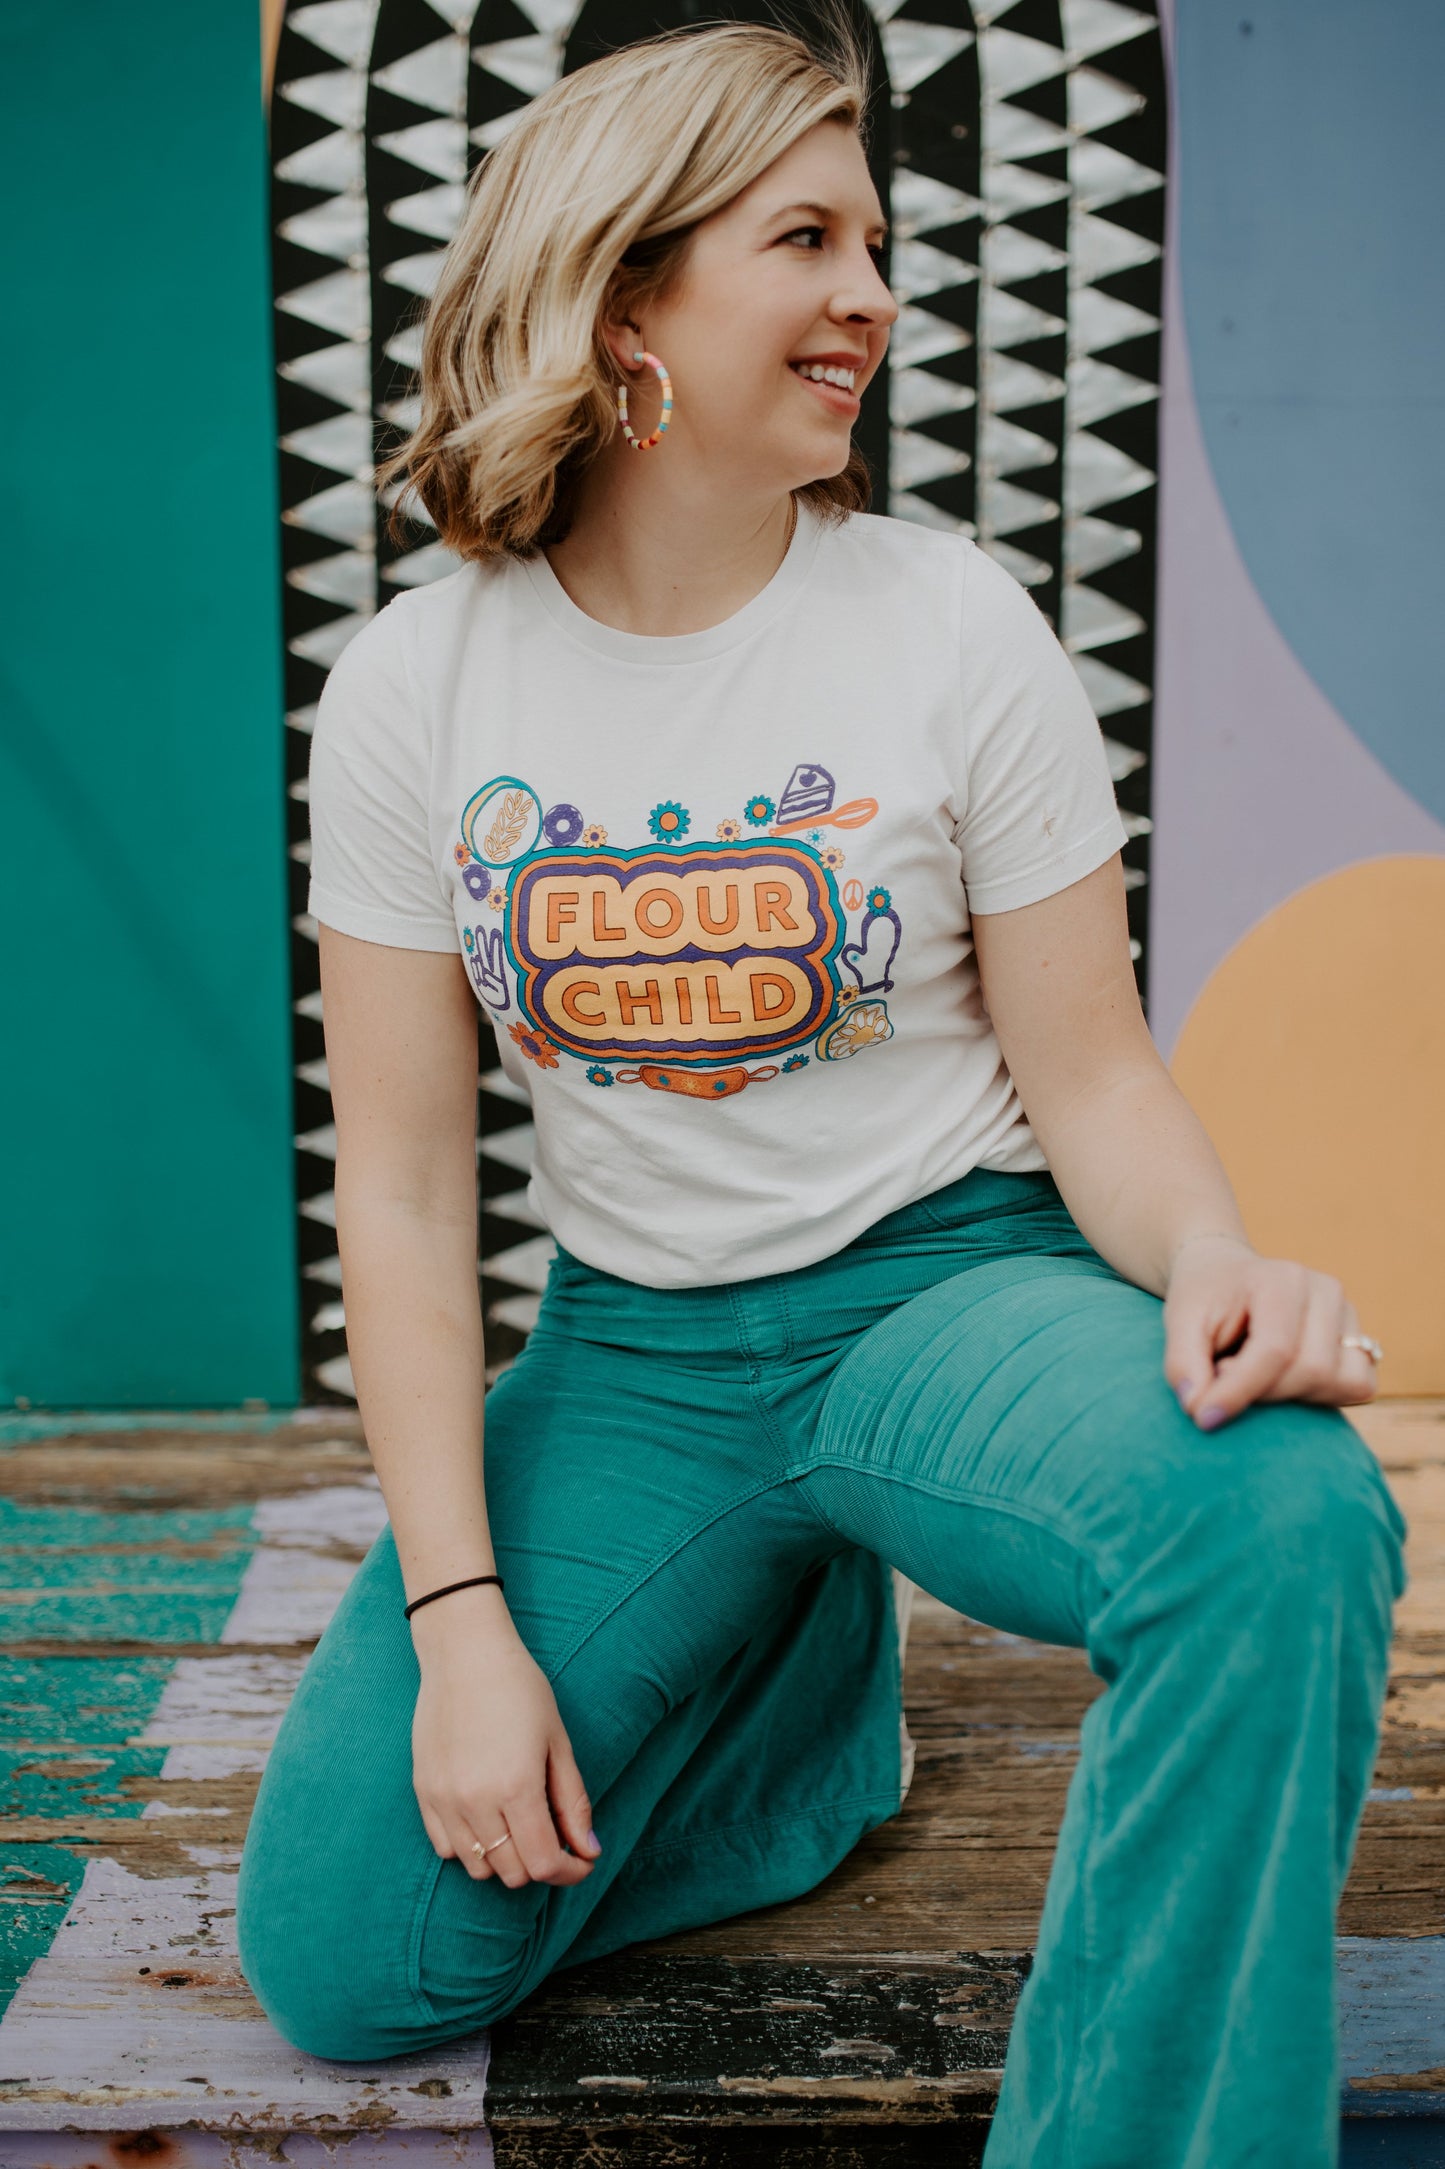 A woman in a white tee with colorful designs and the words Flour Child and teal pants poses in front of a mural